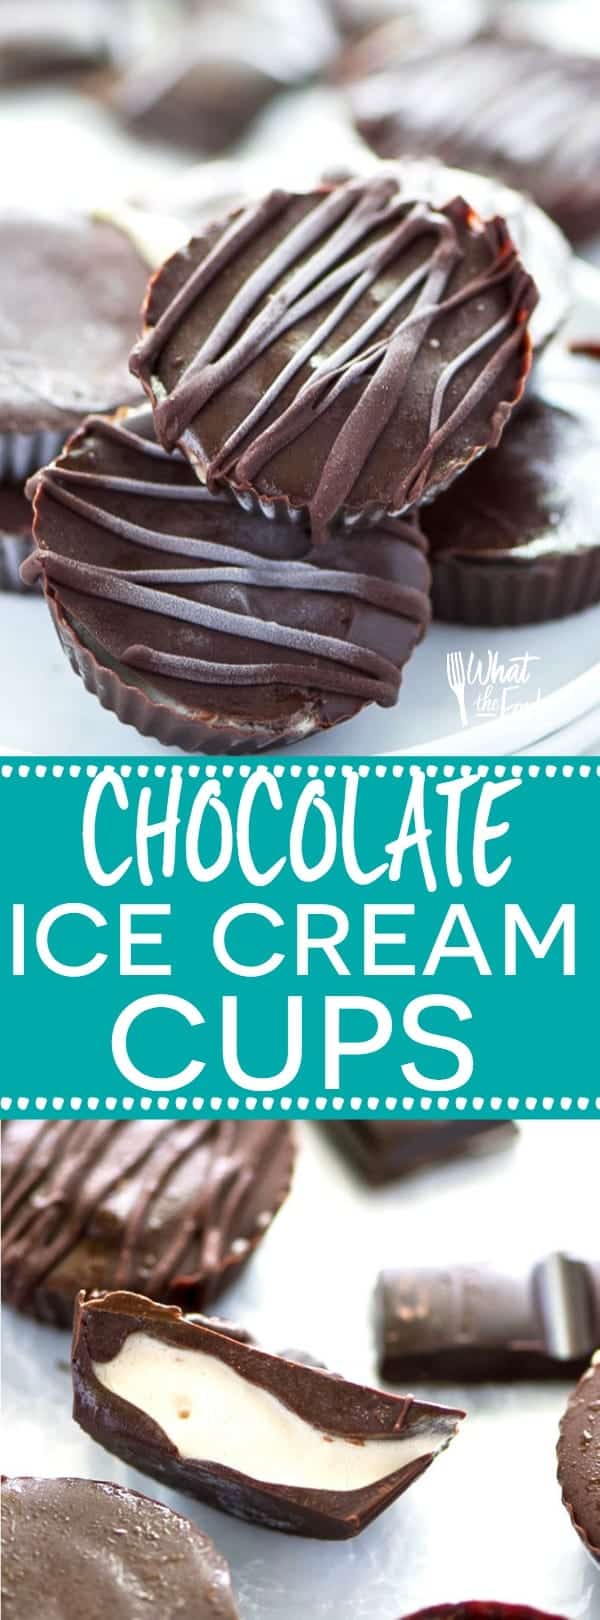 Super Easy Chocolate Covered Ice Cream Cups - your newest ice cream obsession! They're like a peanut butter cup but filled with ice cream in stead of peanut butter! Recipe from @whattheforkblog | whattheforkfoodblog.com | dairy free recipes | dairy free desserts | gluten free and dairy free | ice cream recipes | no-bake dessert recipes | dairy free ice cream | chocolate desserts